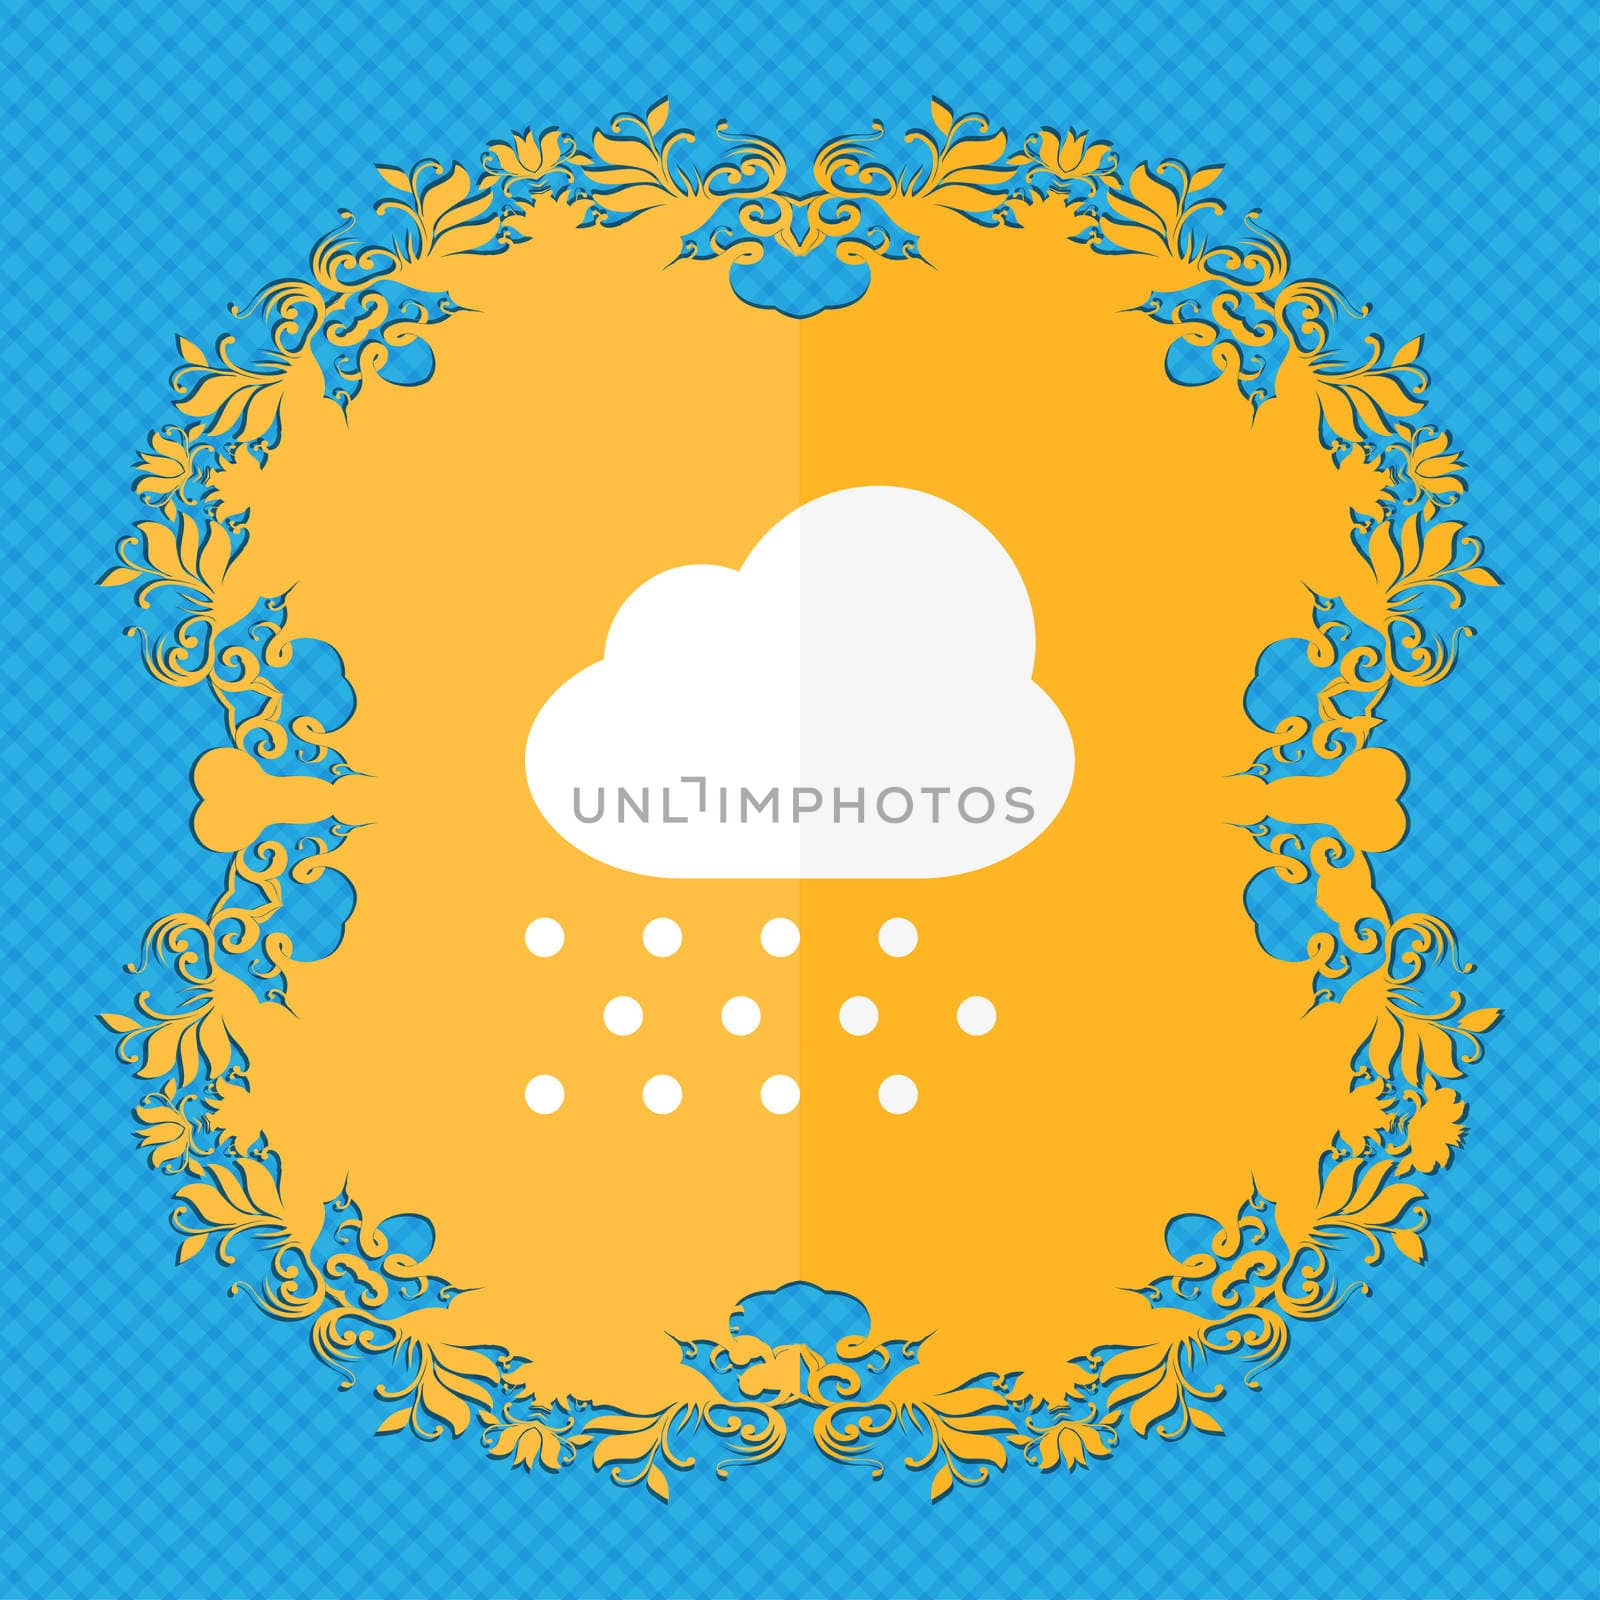 snowing . Floral flat design on a blue abstract background with place for your text. illustration